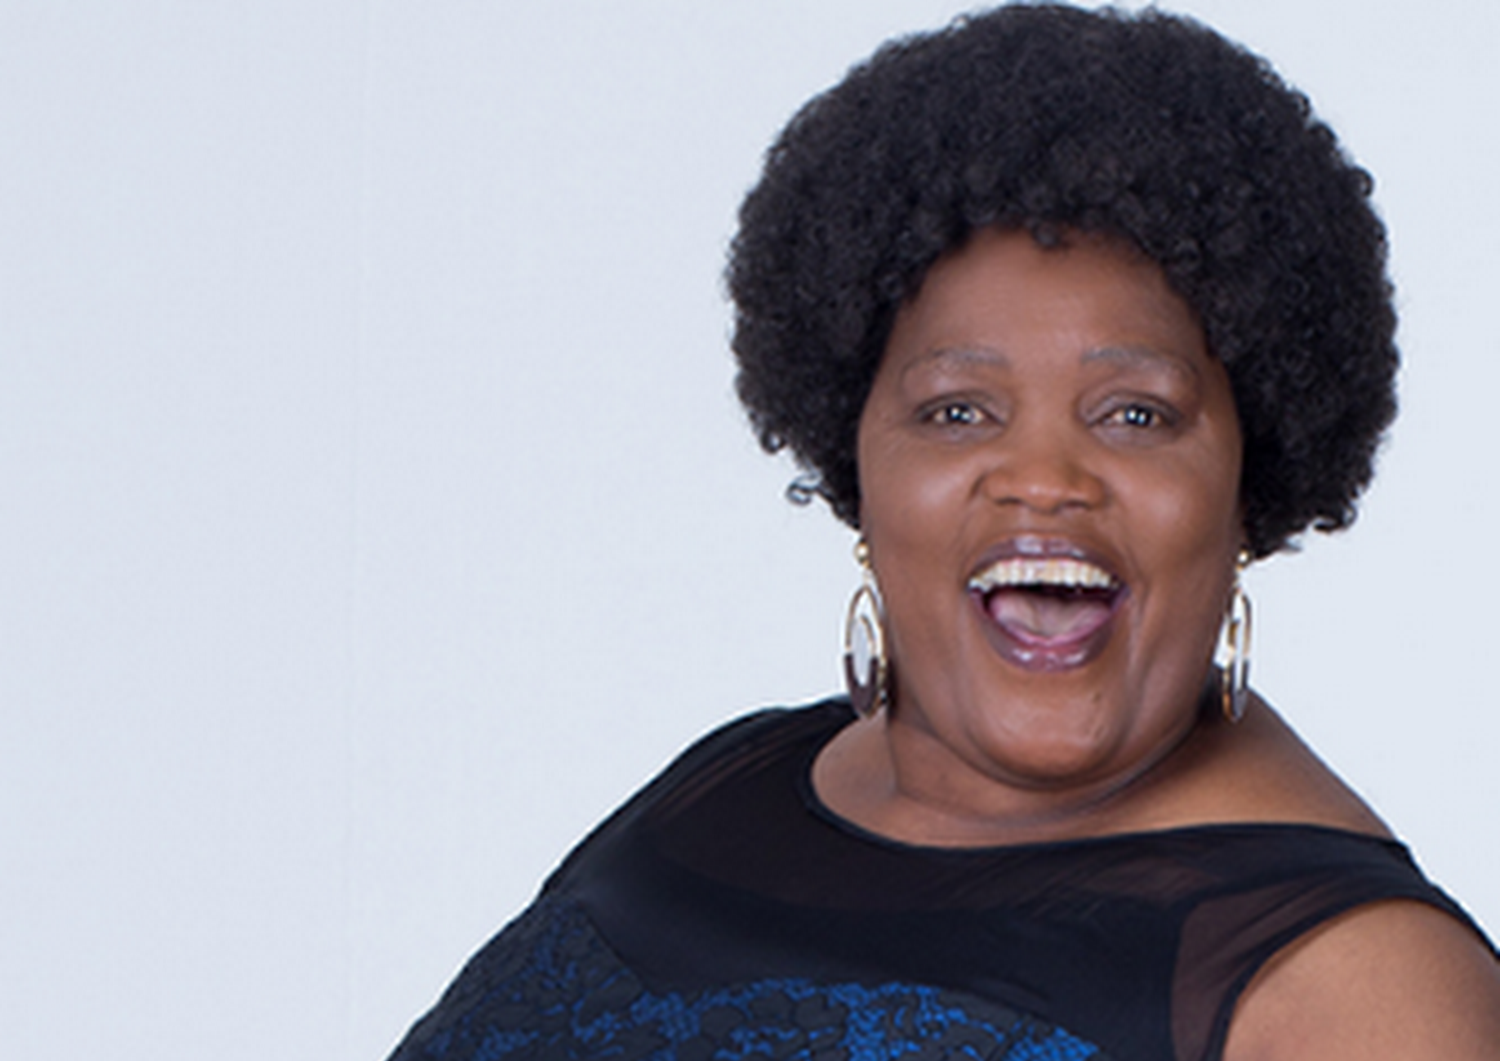 Skeem Saam Actress Nokuzola Mlengana Passes Away (Sis Ouma). Mzansi has been dealt a somber card by life once again, as the entertainment industry suffers another great loss. Reports have confirmed that Skeem Saam actress Nokuzola Mlengana, who plays 'Sis Ouma' on the popular SABC 1 soapie has passed away. Mlengana who was 58 years old passed passed on Monday. The actress was introduced to many fans through her role on Skeem Saam a few years ago and was known for nosey and feisty charcter as a security at Gauteng University. Mlengana has also appeared in a number of other local dramas, TV adverts, and TV movies.